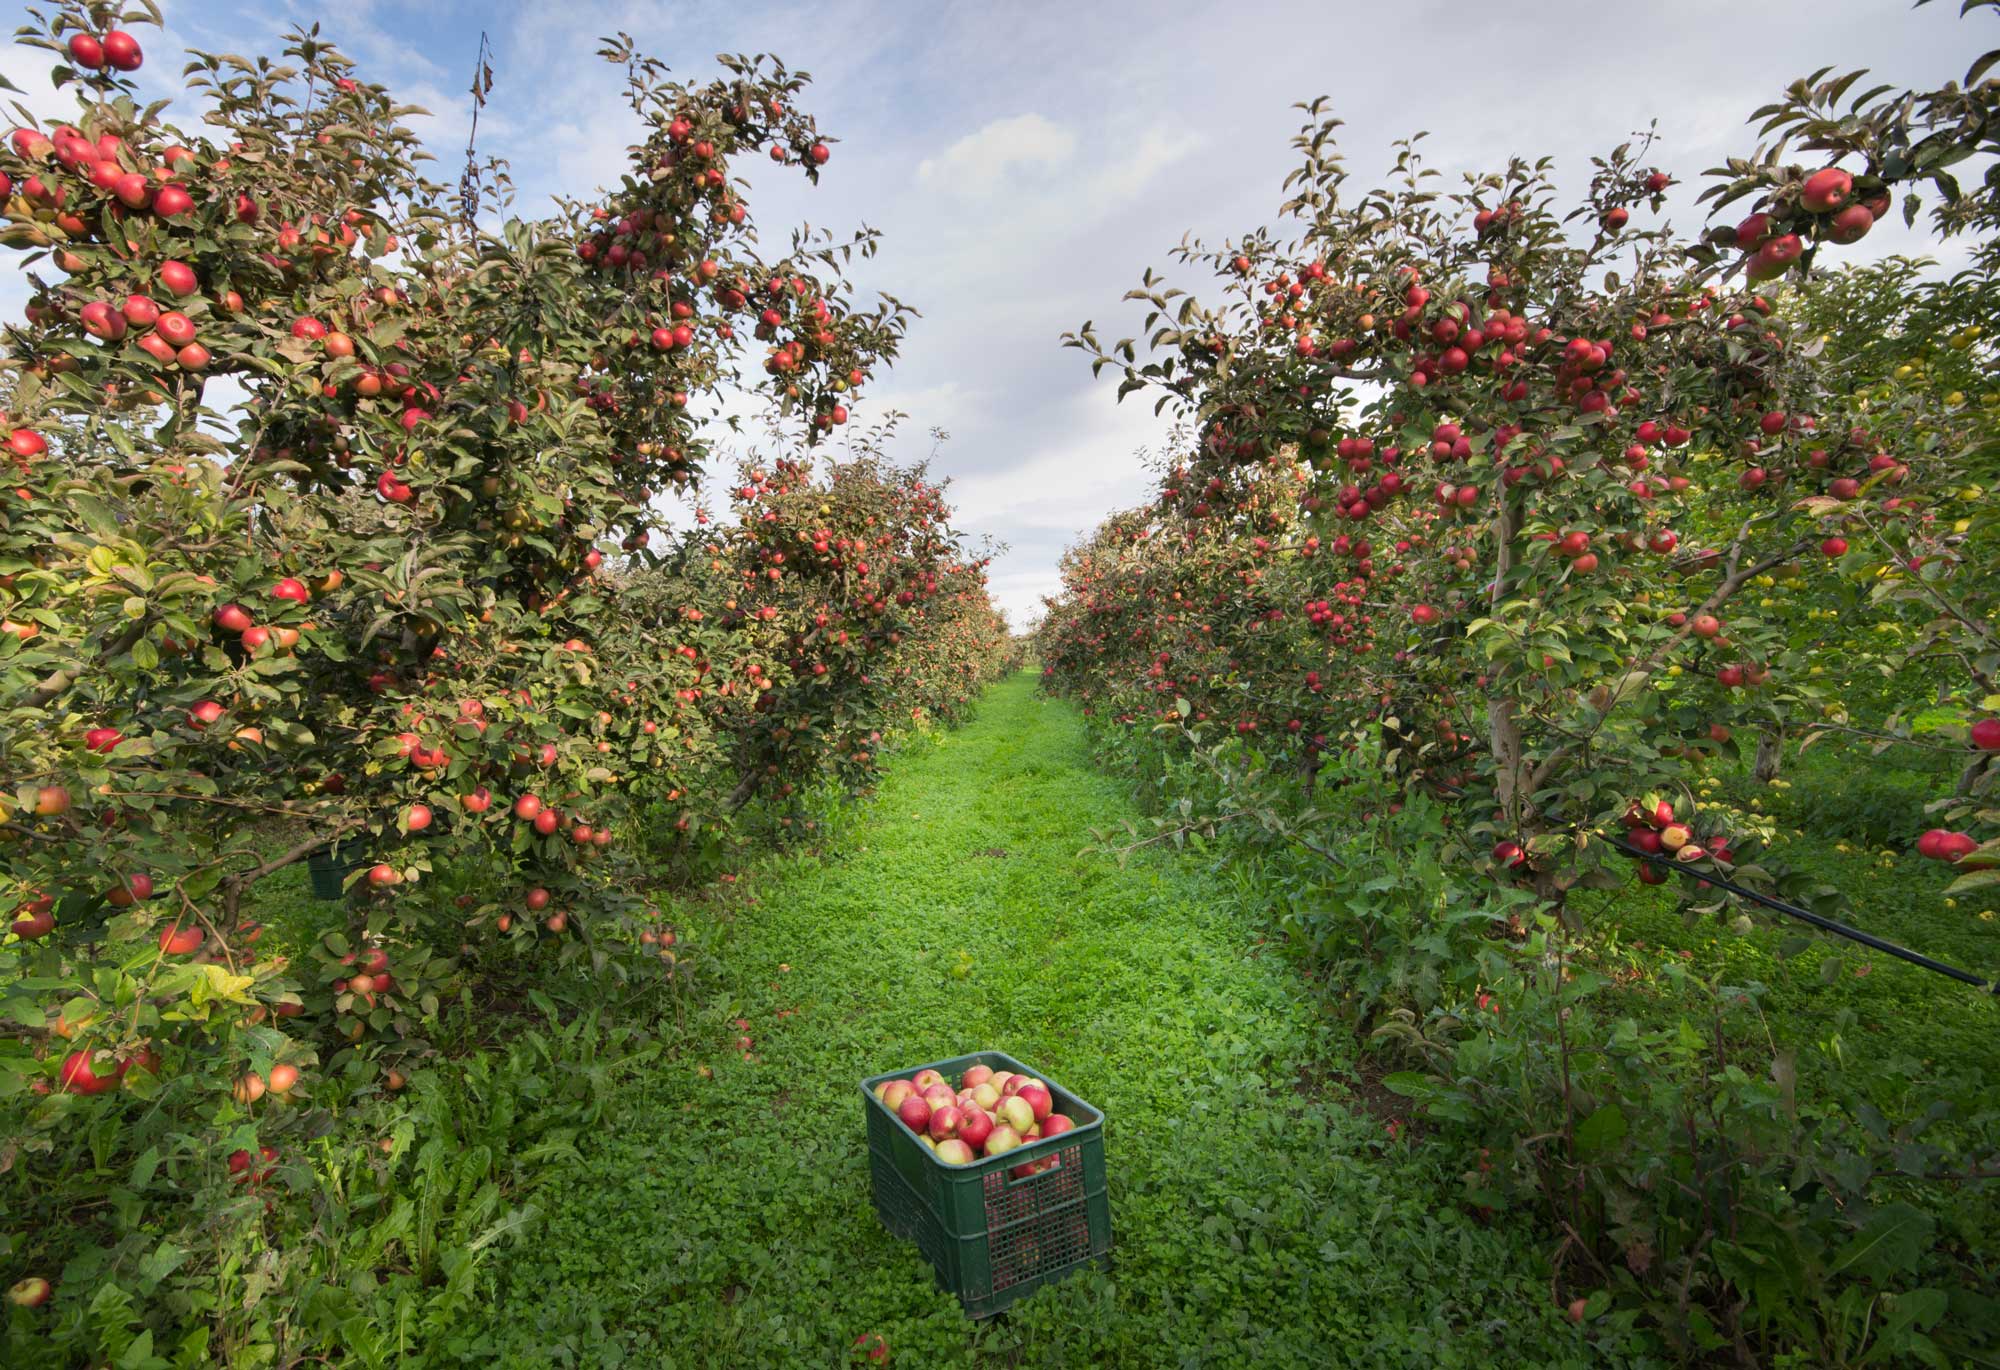 apple orchard with a basket of apples